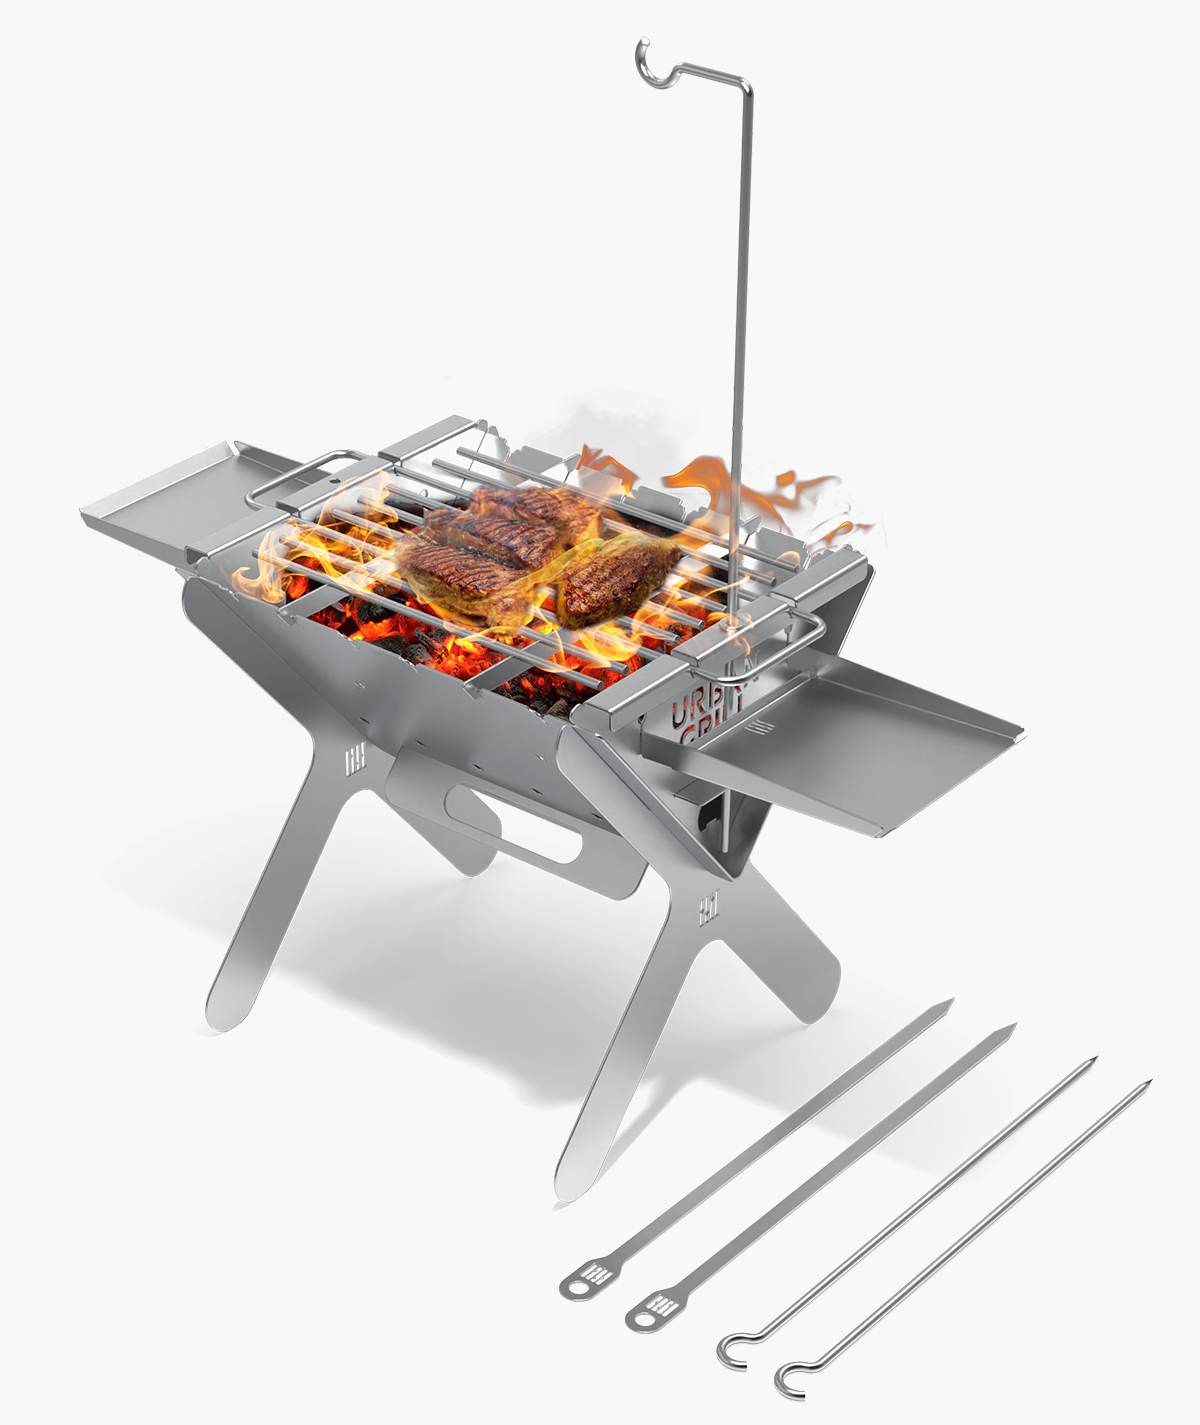 SS - 1 URBANGRILL + 2 FLAT & 2 ROUND SKEWERS + 1 BBQ GRATE + 1 LIGHT STAND + 2 SIDE TRAYS